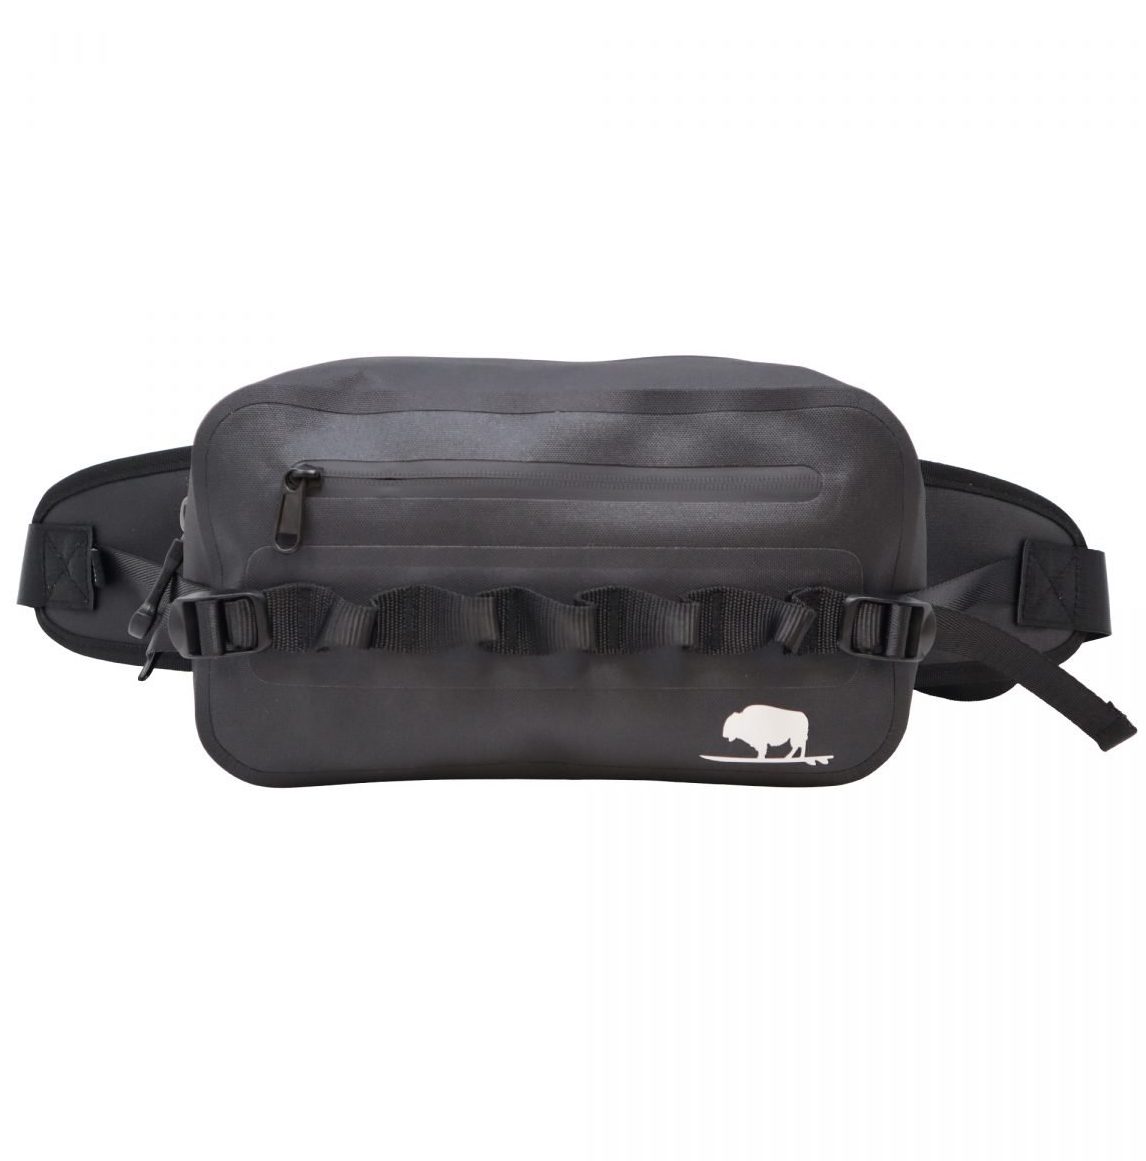 Submersible Hip Pack Black: The Ultimate Waterproof Accessory